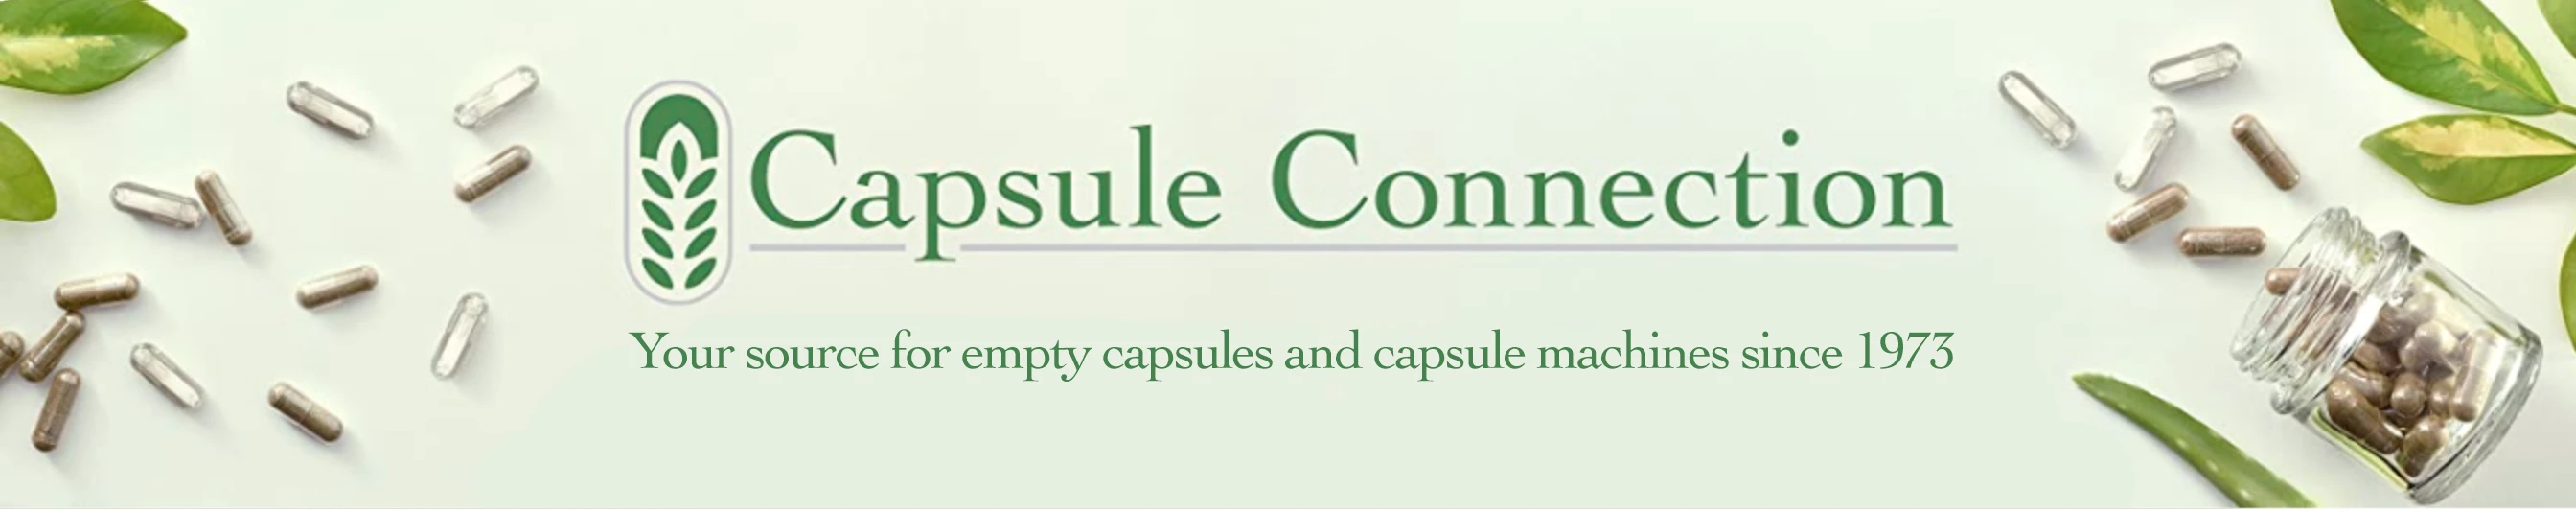  Capsule Connection promotions